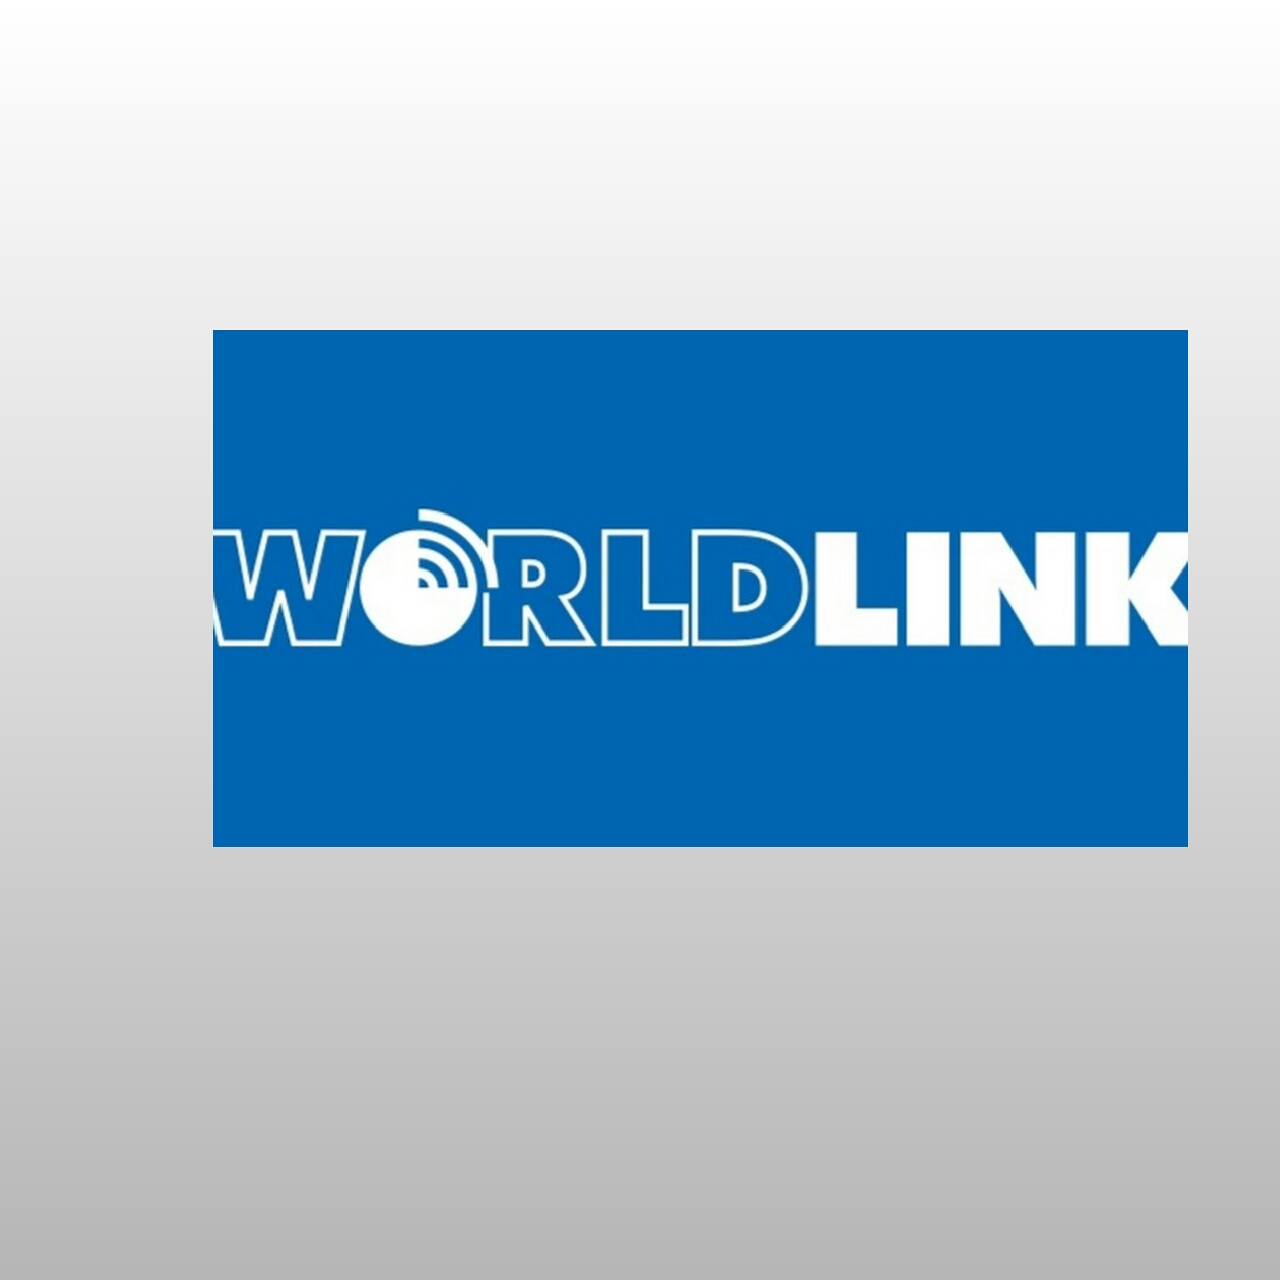 WorldLink Is Building Data Centers In 14 Cities With An Investment Of Rs. 3 Billion